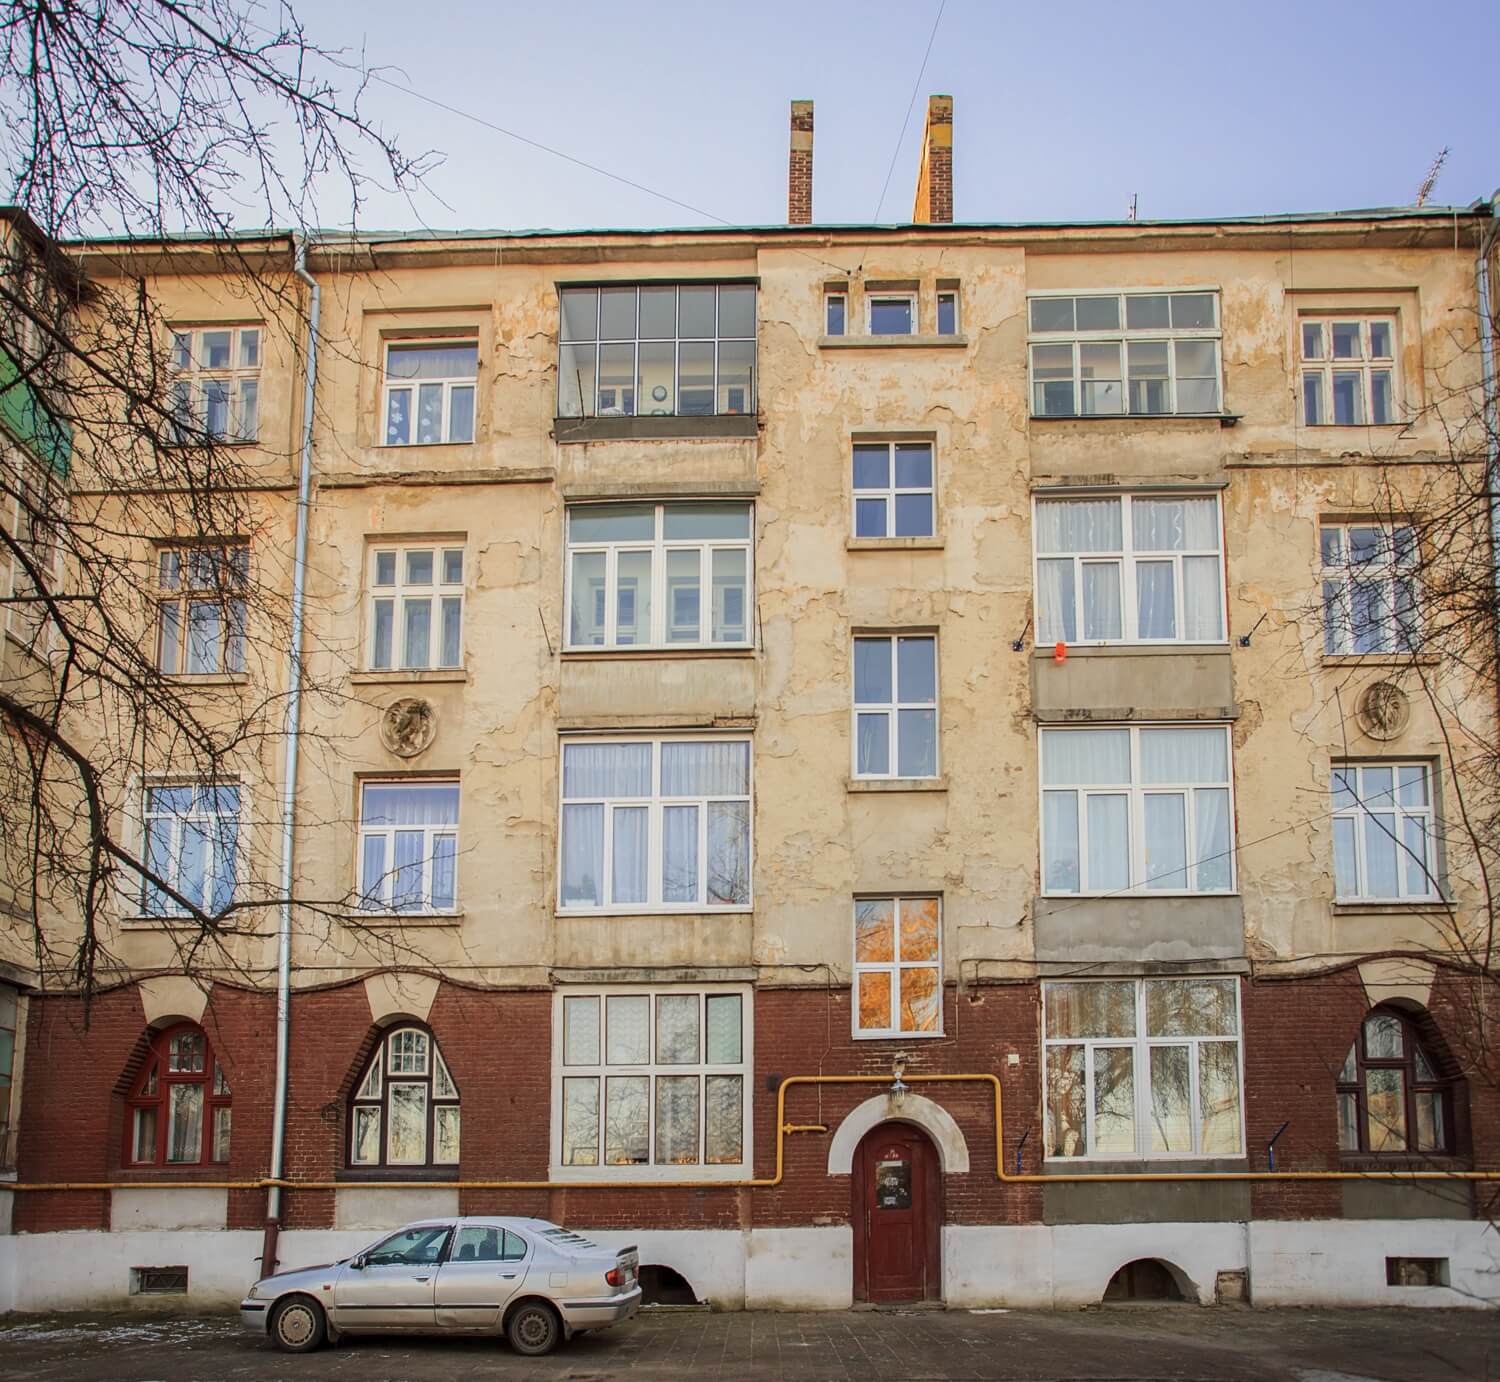 Vul. Promyslova, 31. Building constructed for tram depot workers. Part of the principal facade/Photo courtesy of Nazarii Parkhomyk, 2015